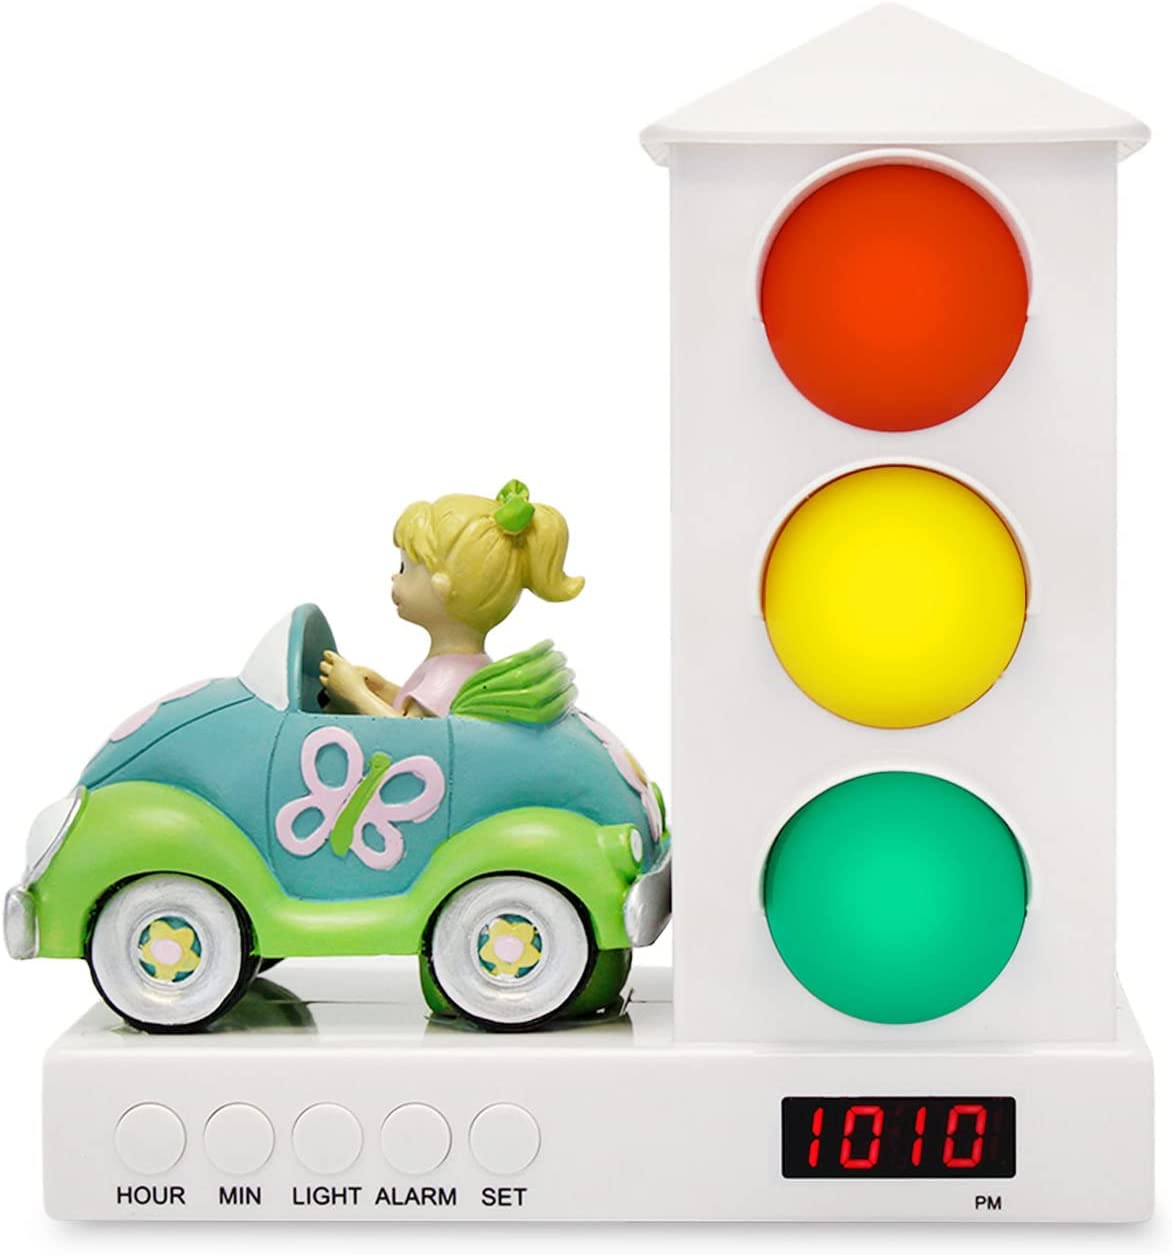 It’s About Time Stoplight Sculpted Kid’s Alarm Clock